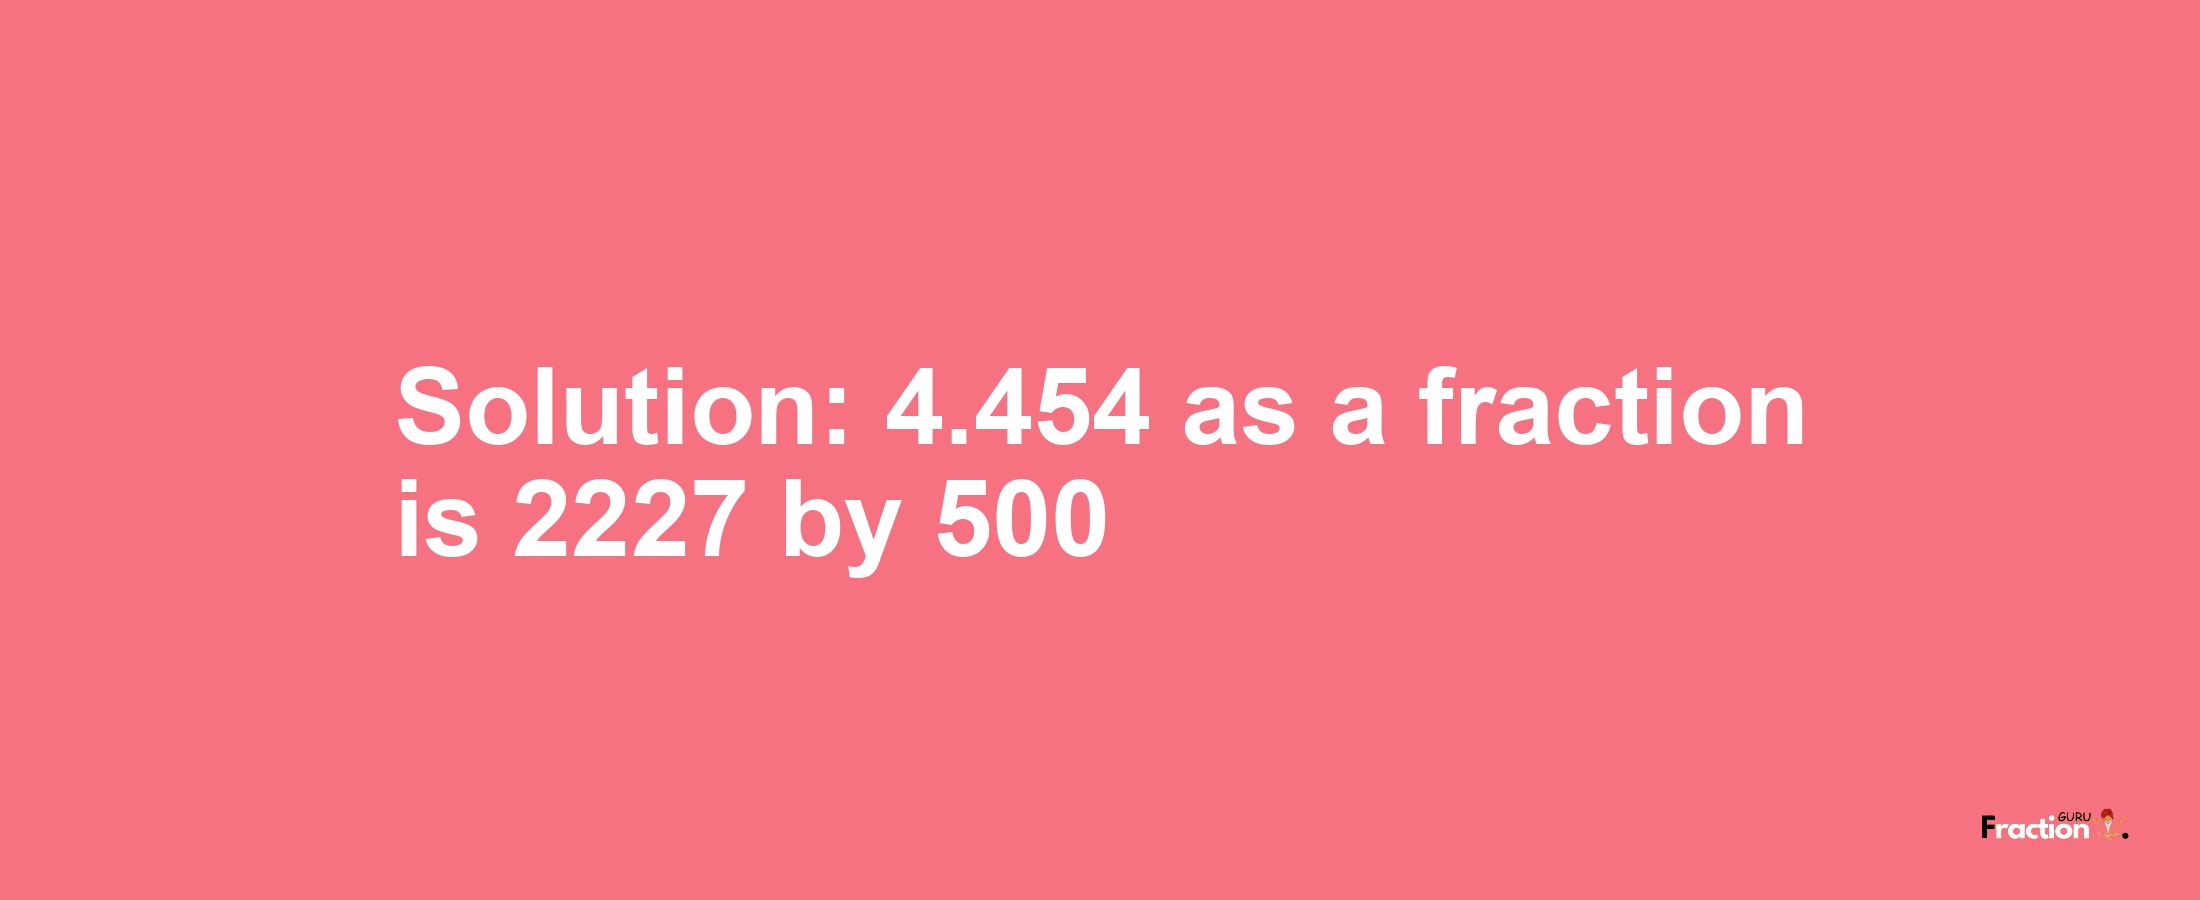 Solution:4.454 as a fraction is 2227/500